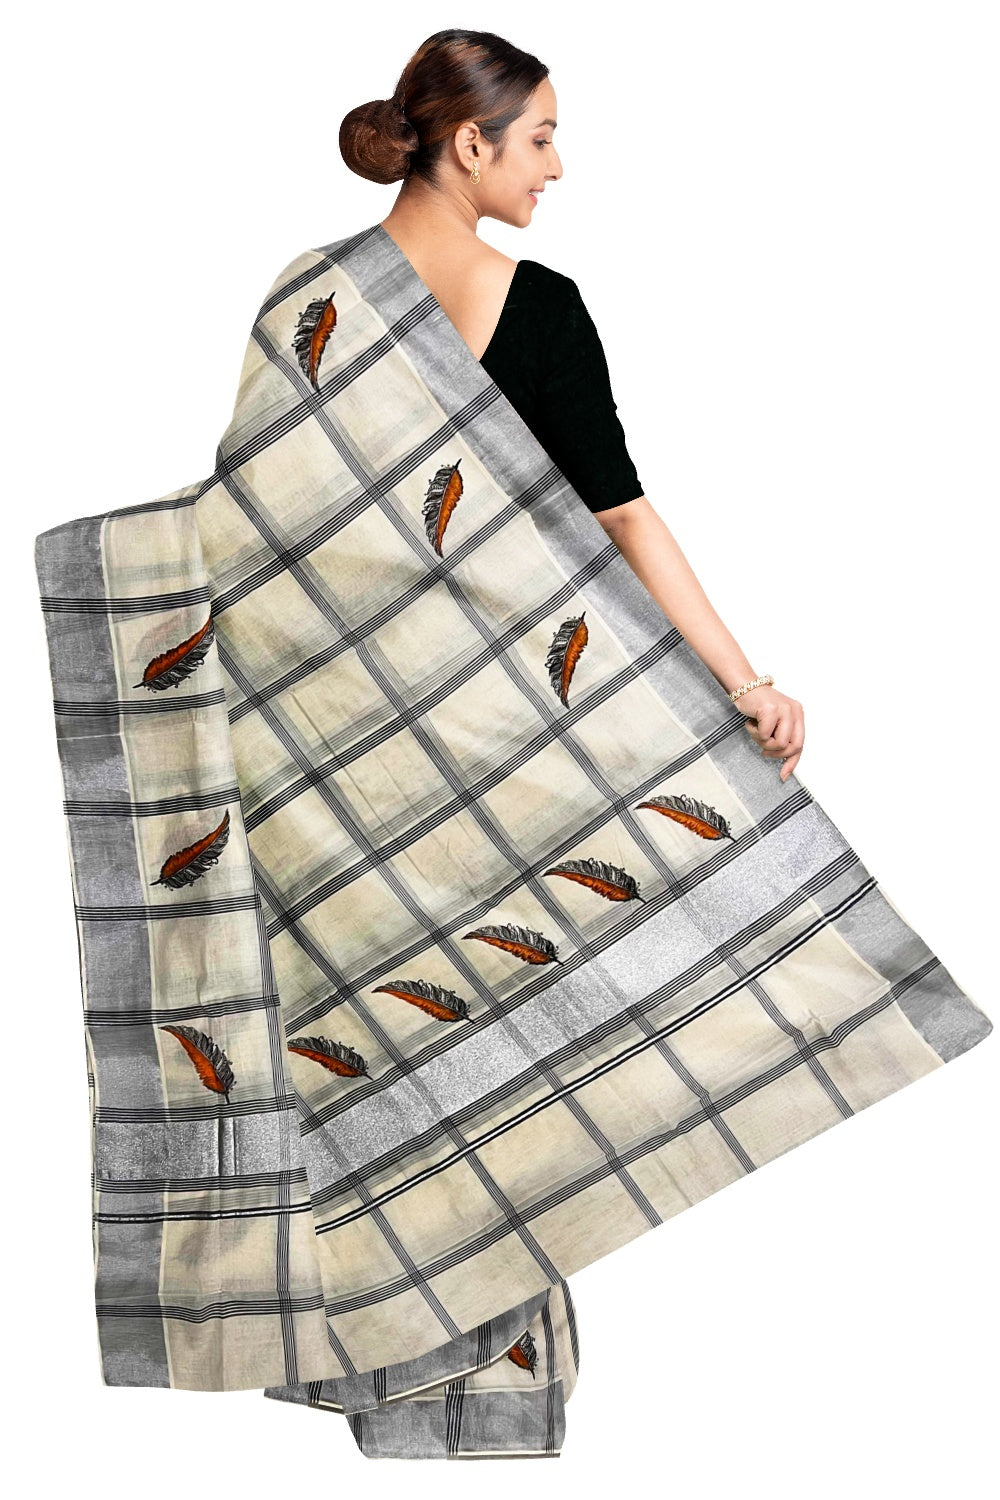 Off White Kerala Cotton Black Checkered Saree with Mural Print and Silver Border